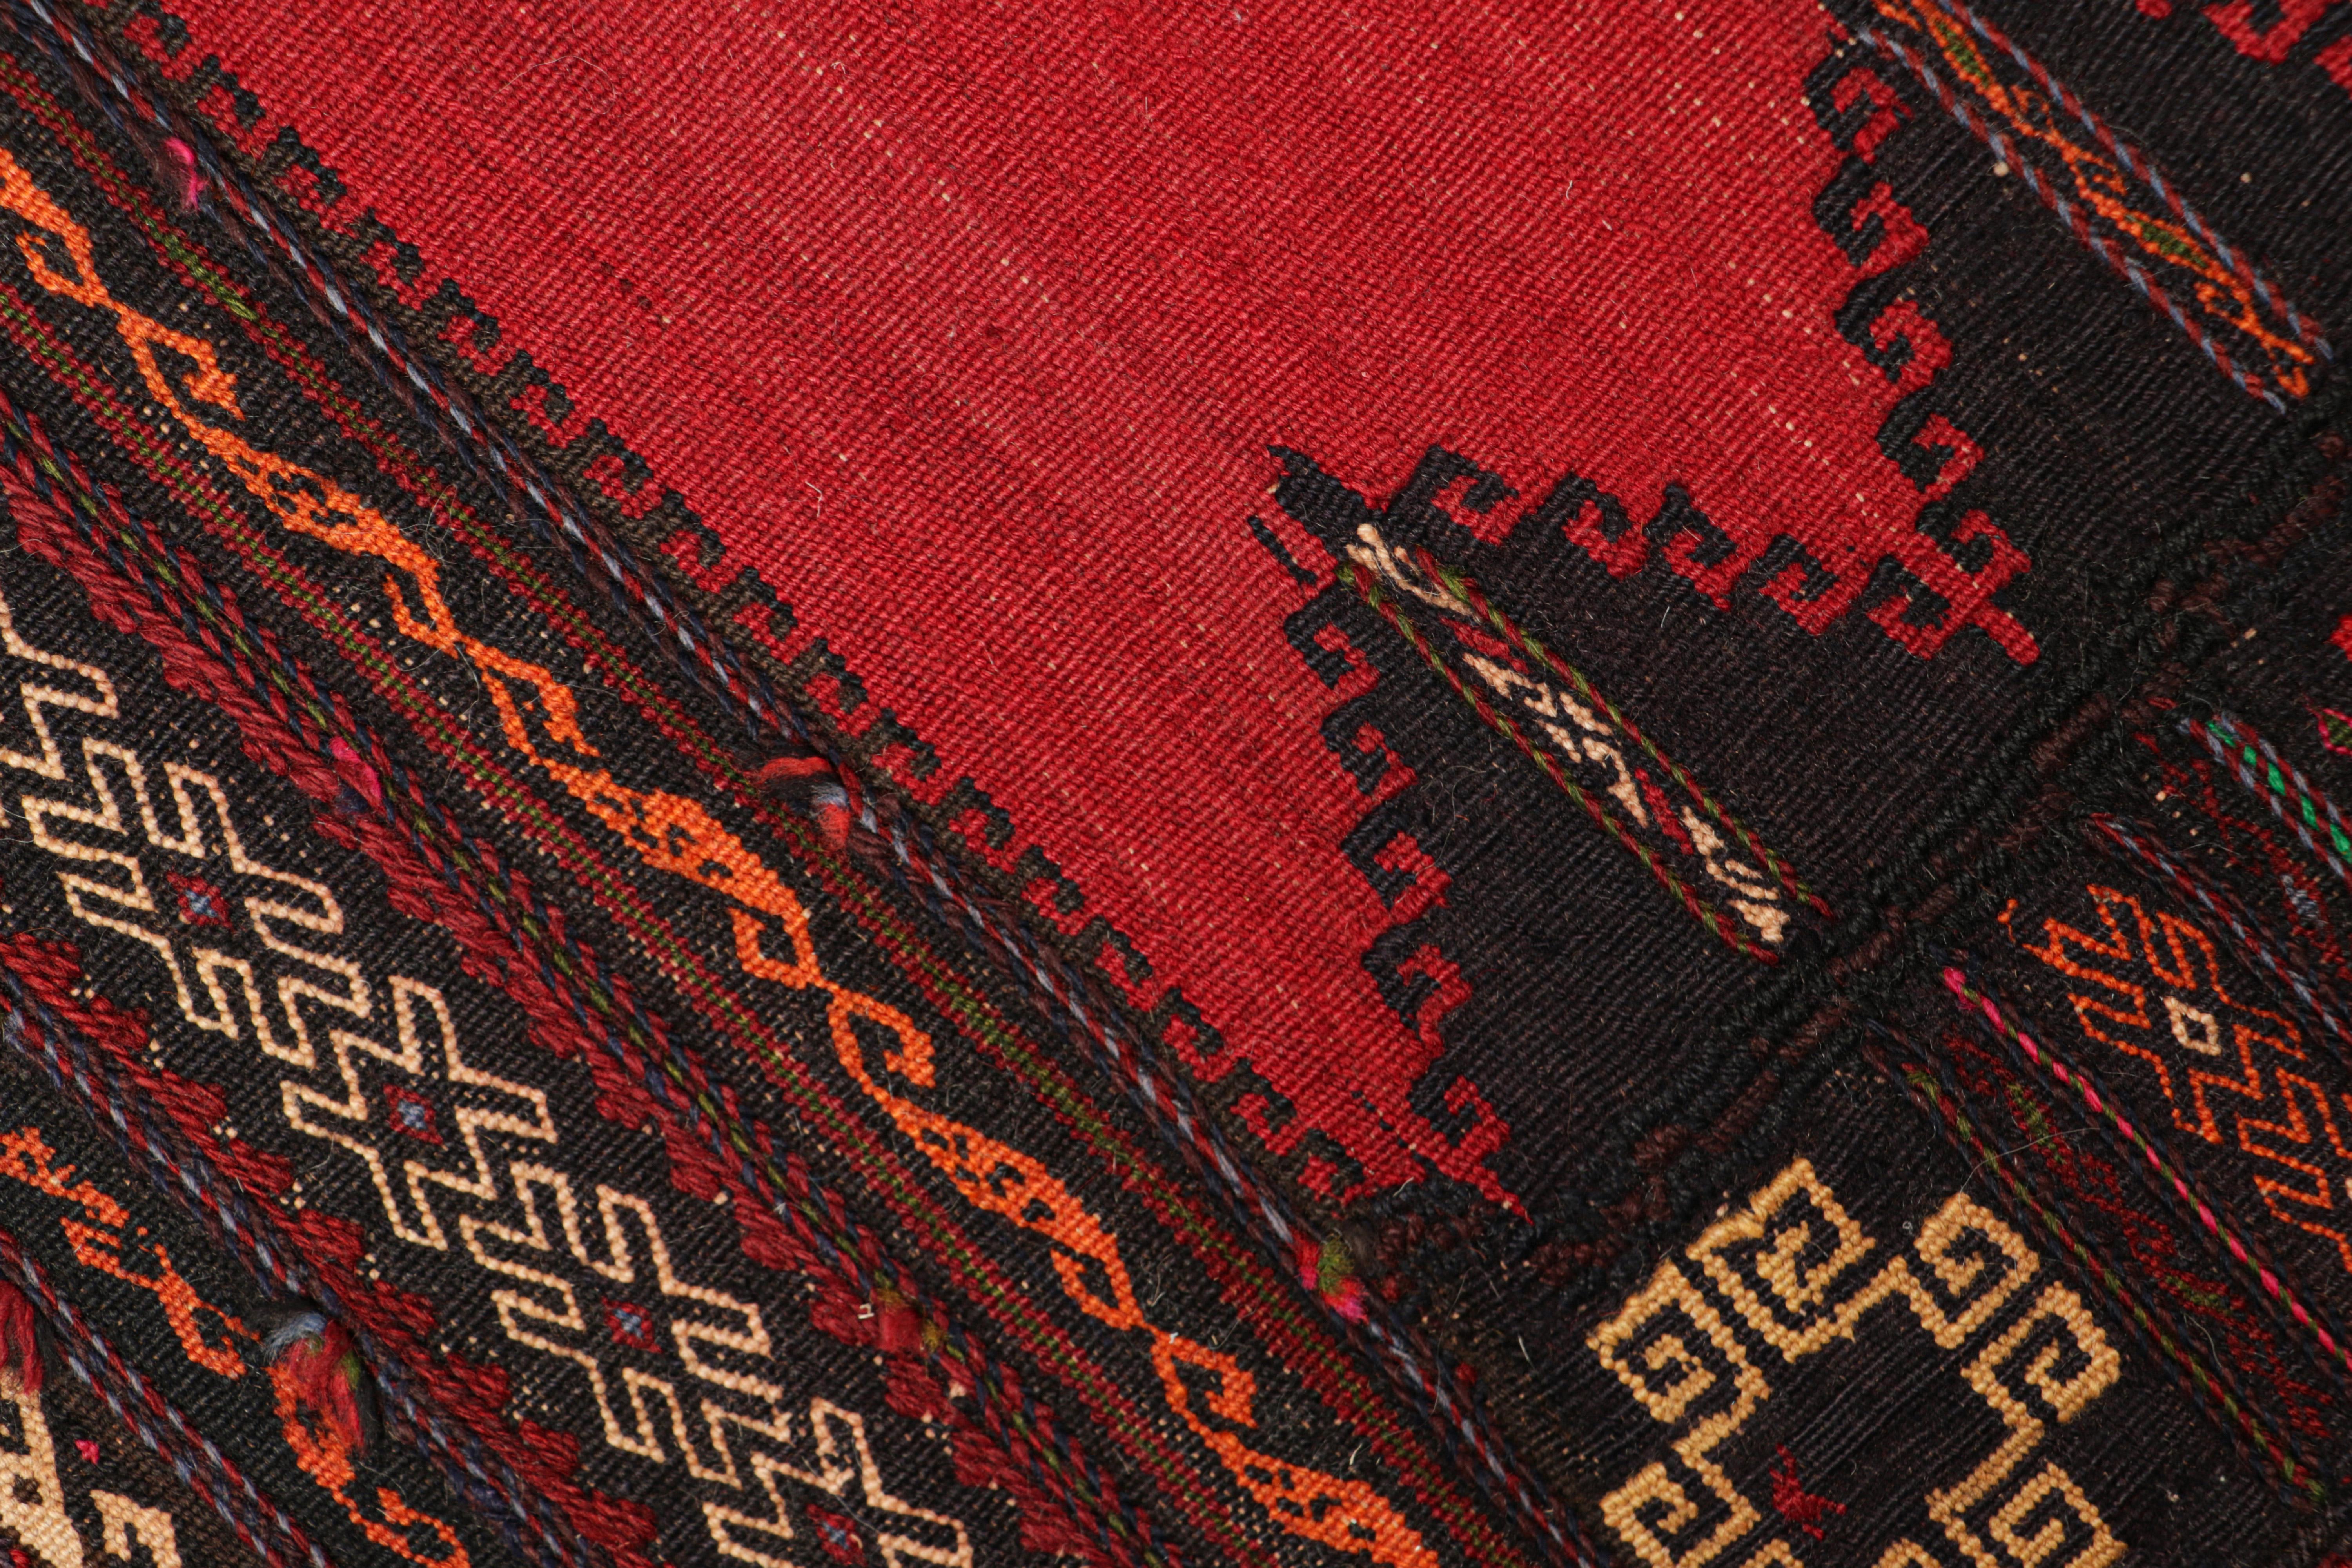 Tribal Vintage Afghan Kilim in Red with Geometric Patterns, from Rug & Kilim For Sale